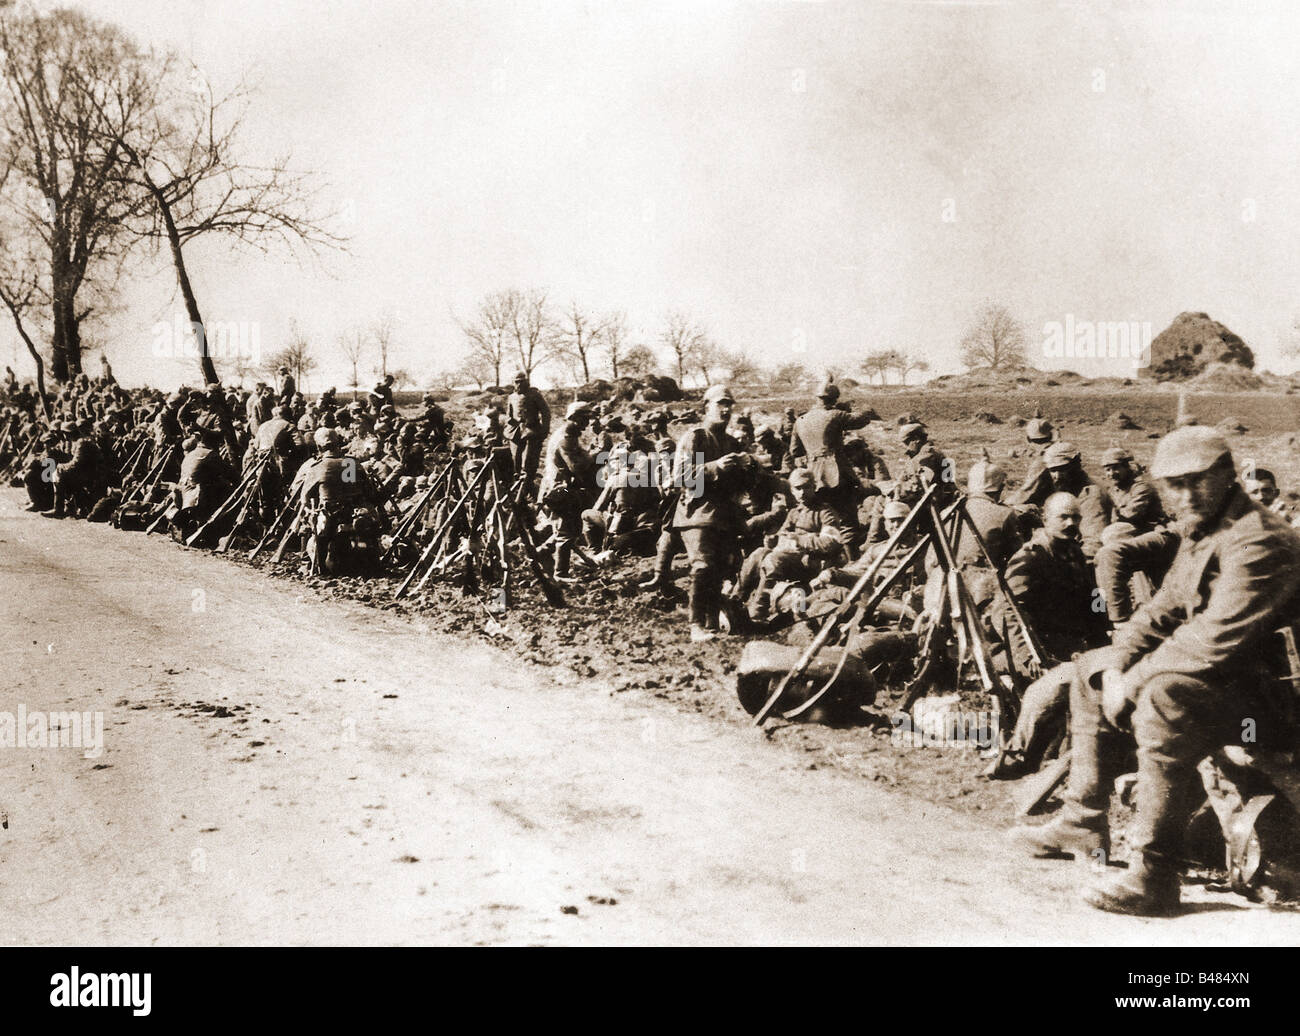 events, First World War / WWI, Western Front, Battle of Verdun 1916, German infantry on the way to the front, resting, France, spring 1916, Pickelhaube, Pickelhauben, spiked helmet, helmets, camp, break, Germany, rifle pyramid, soldiers, German Empire, army, road, 20th century, historic, historical, people, 1910s, Stock Photo